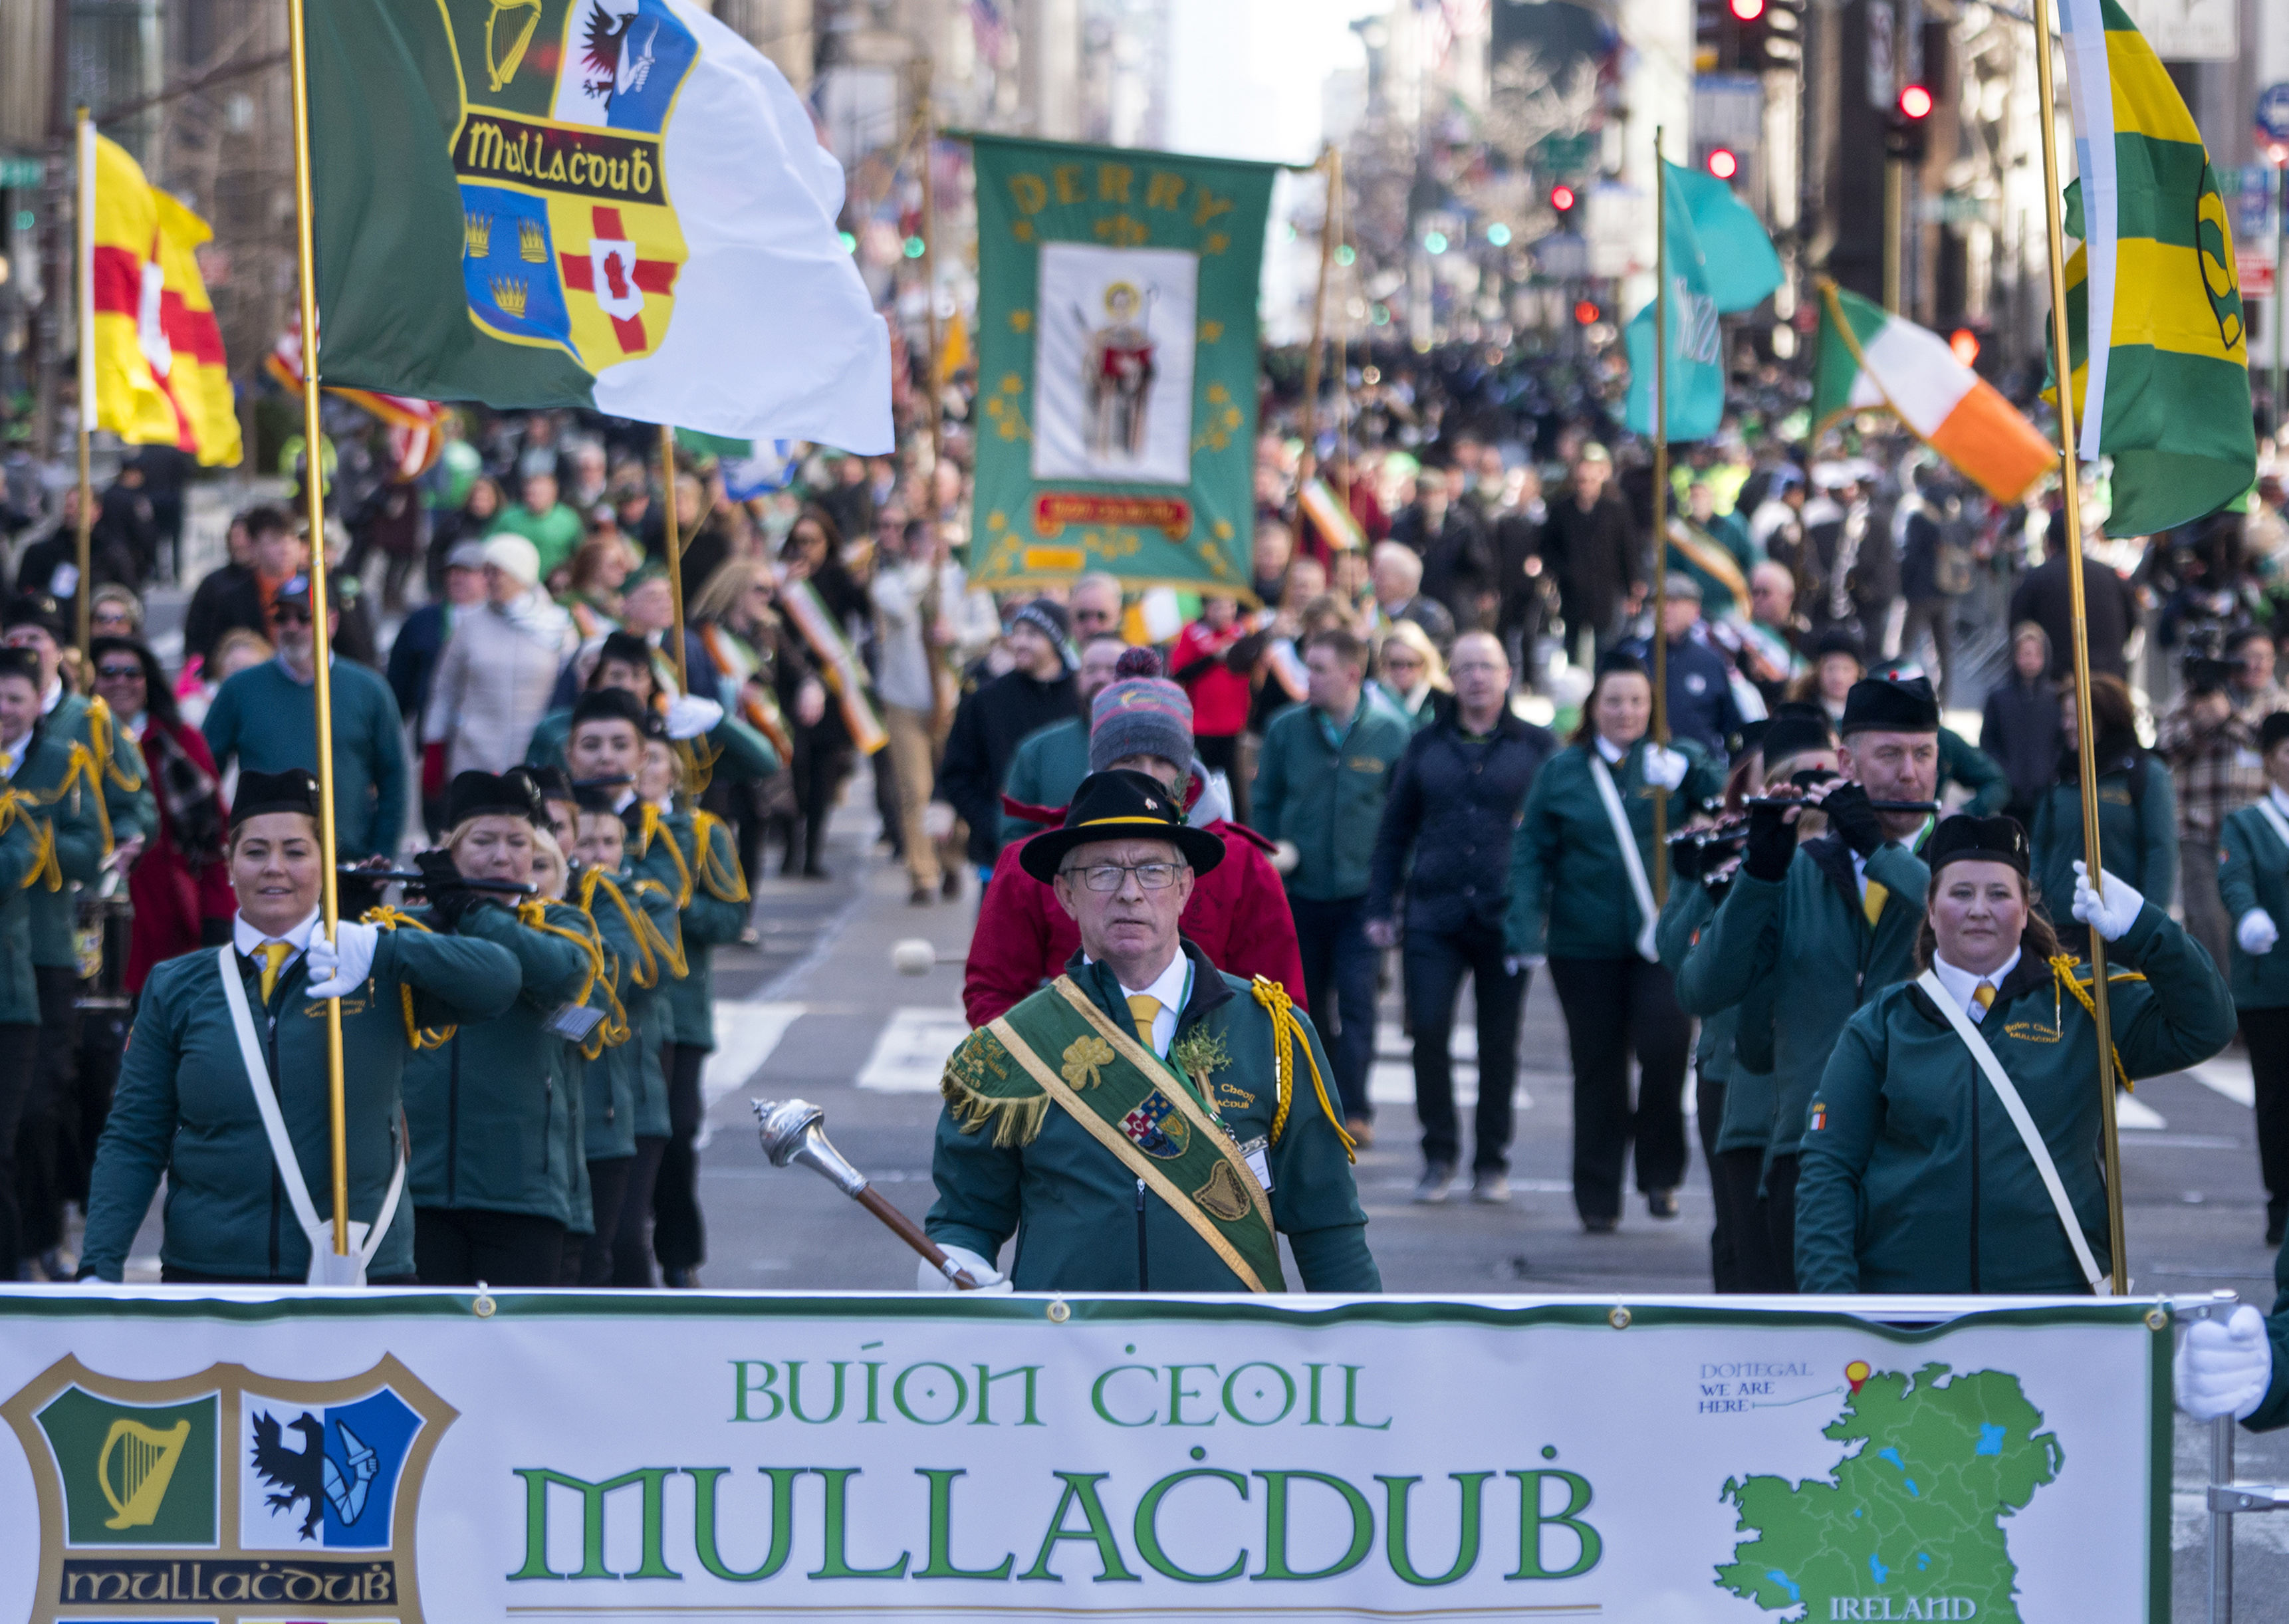 Units march along Fifth Avenue as they take part in the St. Patrick's Day parade Saturday, March 17, 2018, in New York.  Several bagpipe bands led a parade made up of over 100 marching bands after Democratic Gov. Andrew Cuomo spoke briefly, calling it a 